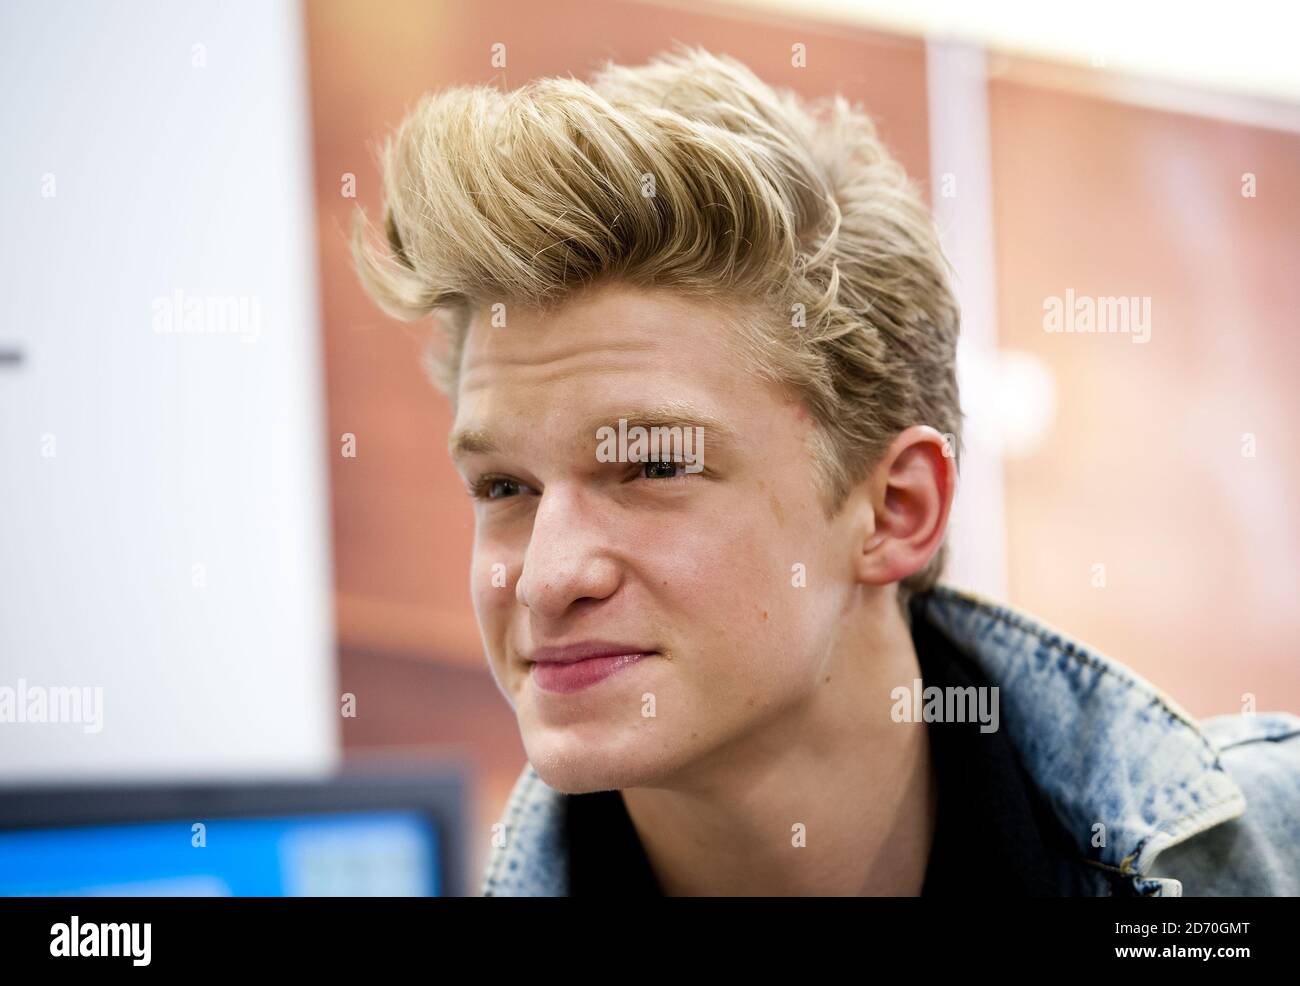 Cody Simpson pictured at a 'shoe signing', for his own range of shoes, at Schuh in central London. Stock Photo